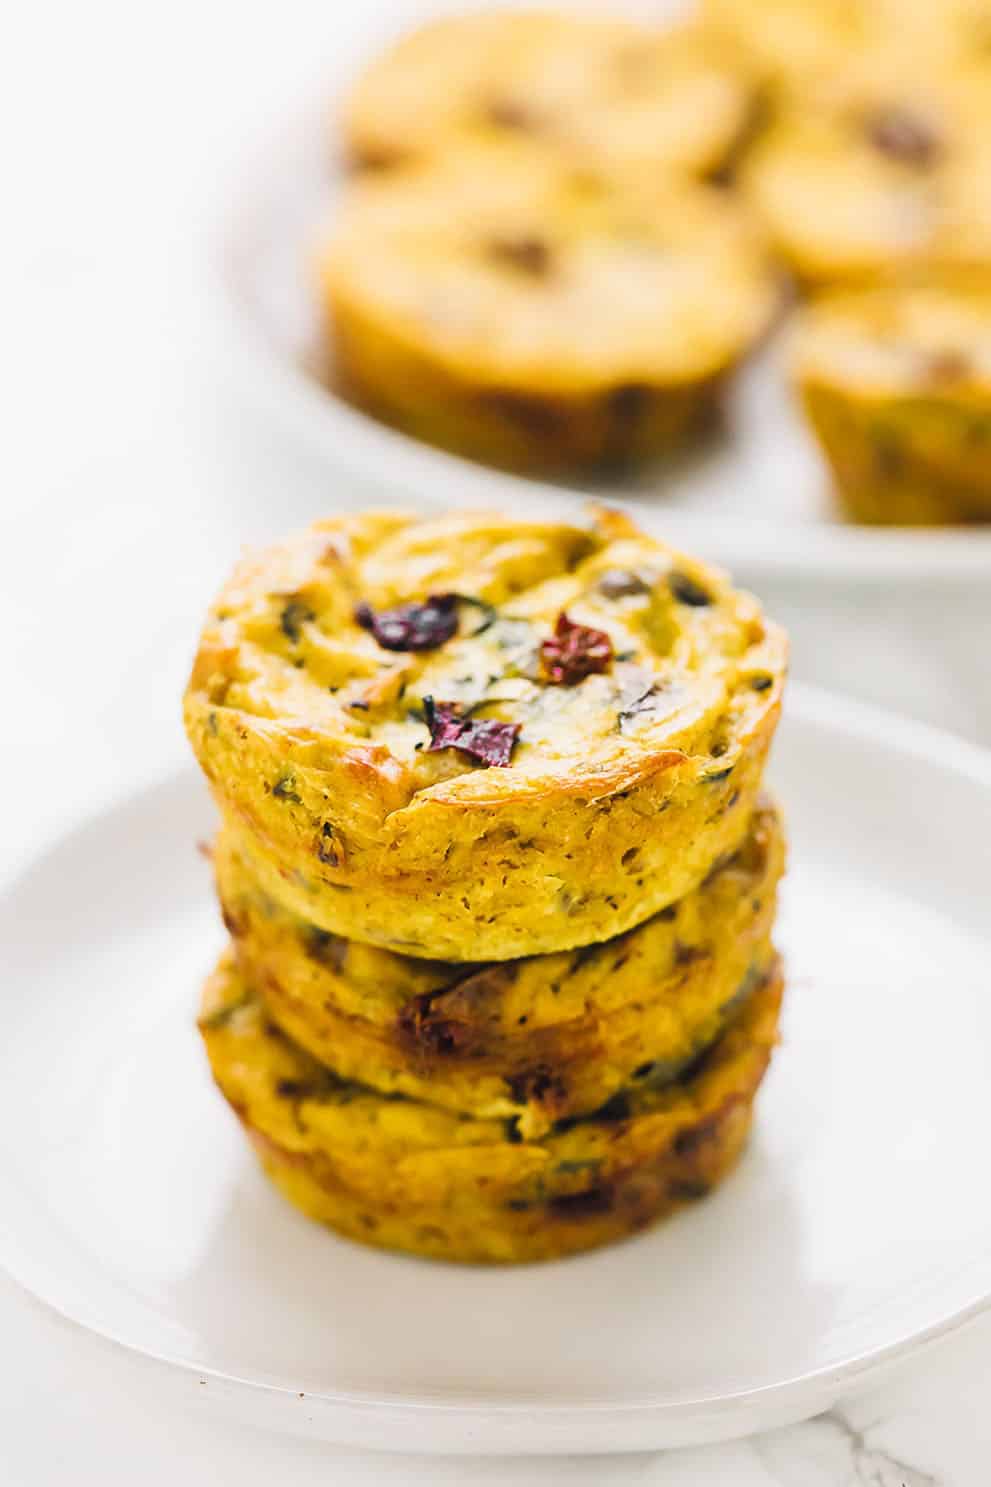  VEGAN QUICHE MUFFINS WITH SUN-DRIED TOMATOES AND SPINACH by Jessica in the Kitchen:these delicious, easy and vegan appetizers are perfect to please a crowd!